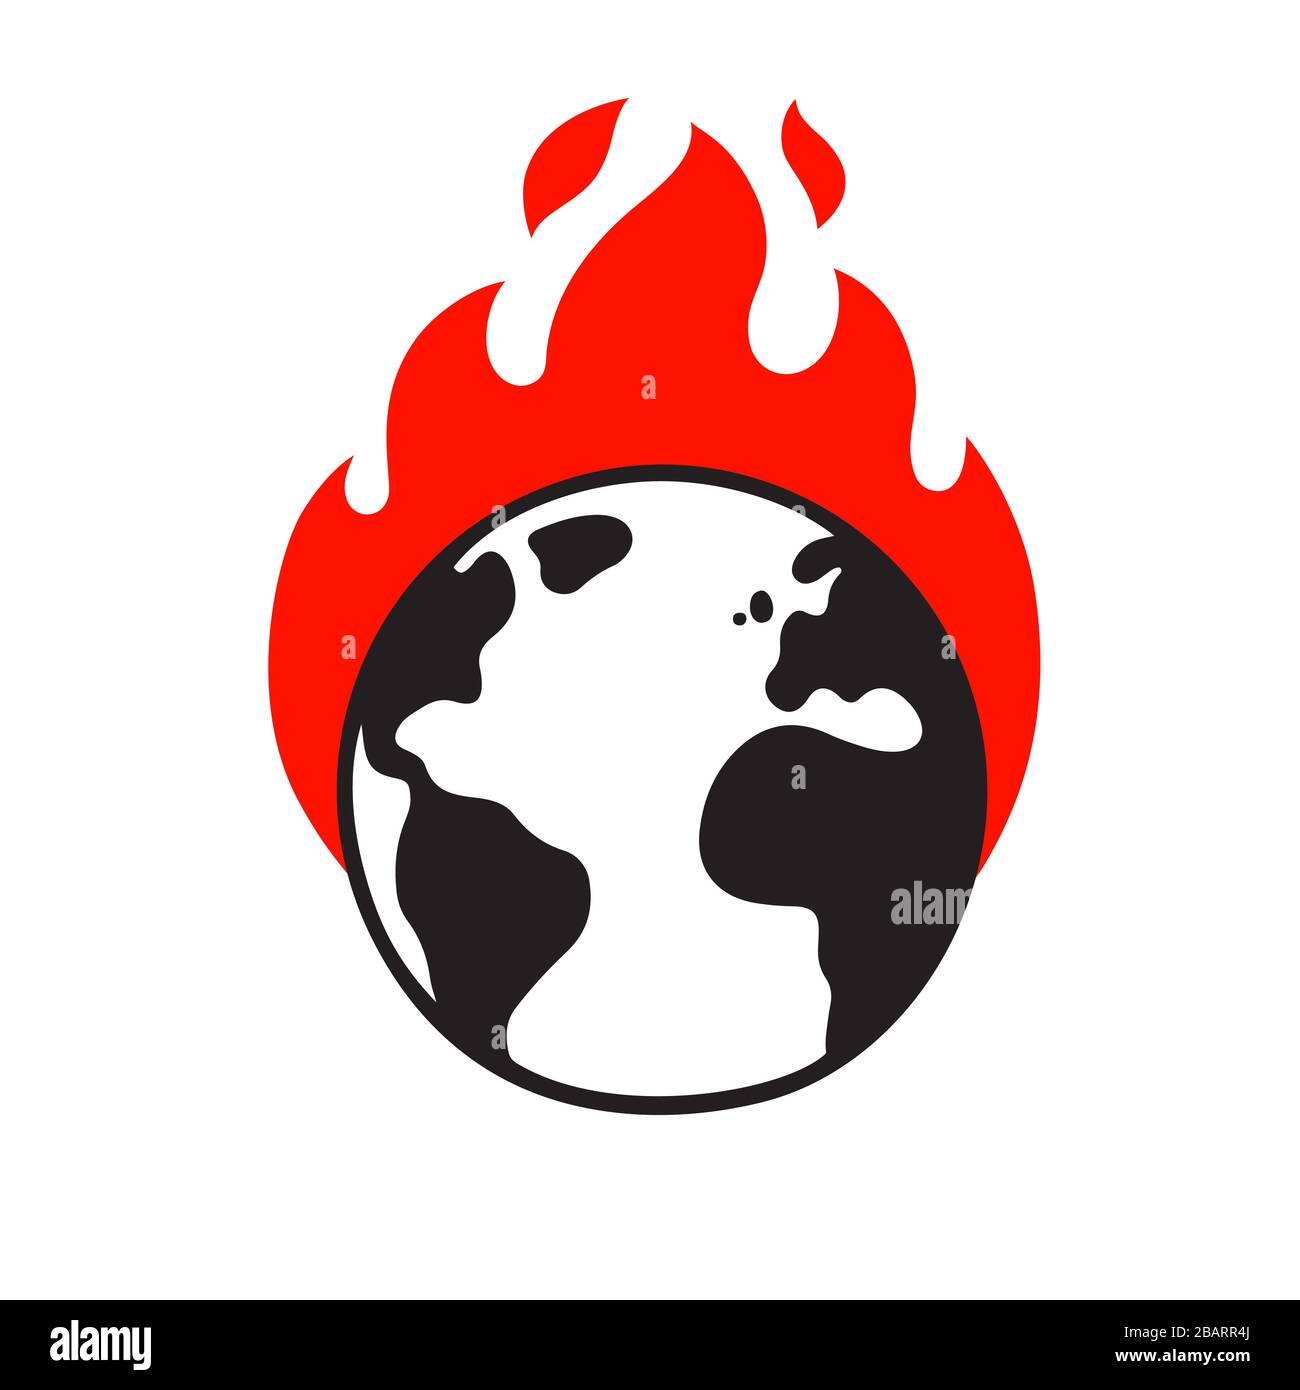 the earth on fire